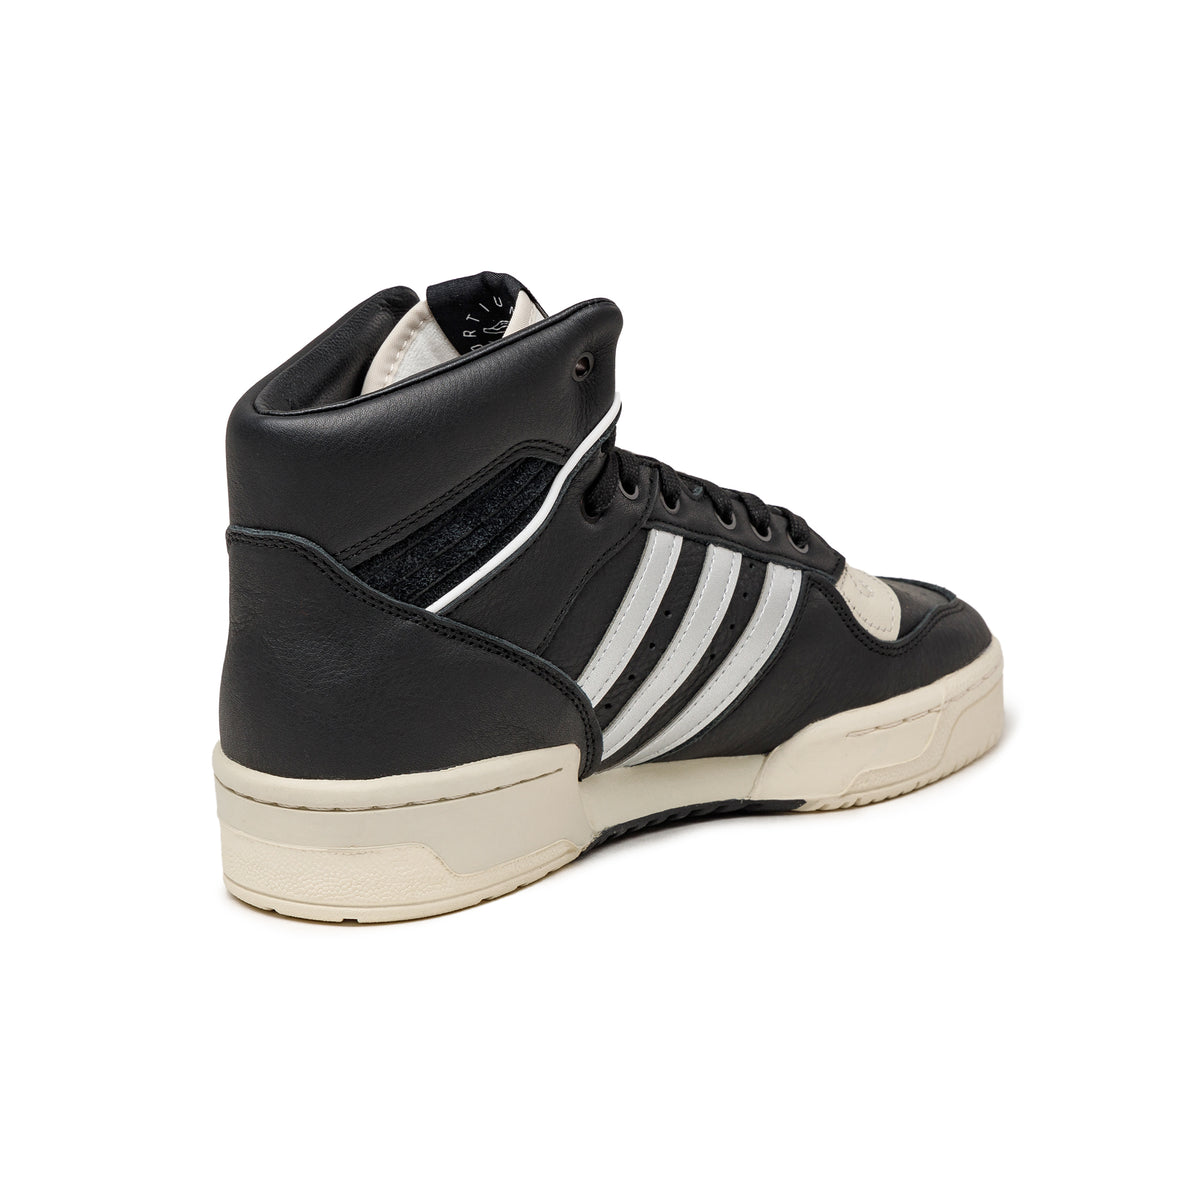 Adidas Rivalry Hi Consortium – buy now at Asphaltgold Online Store!